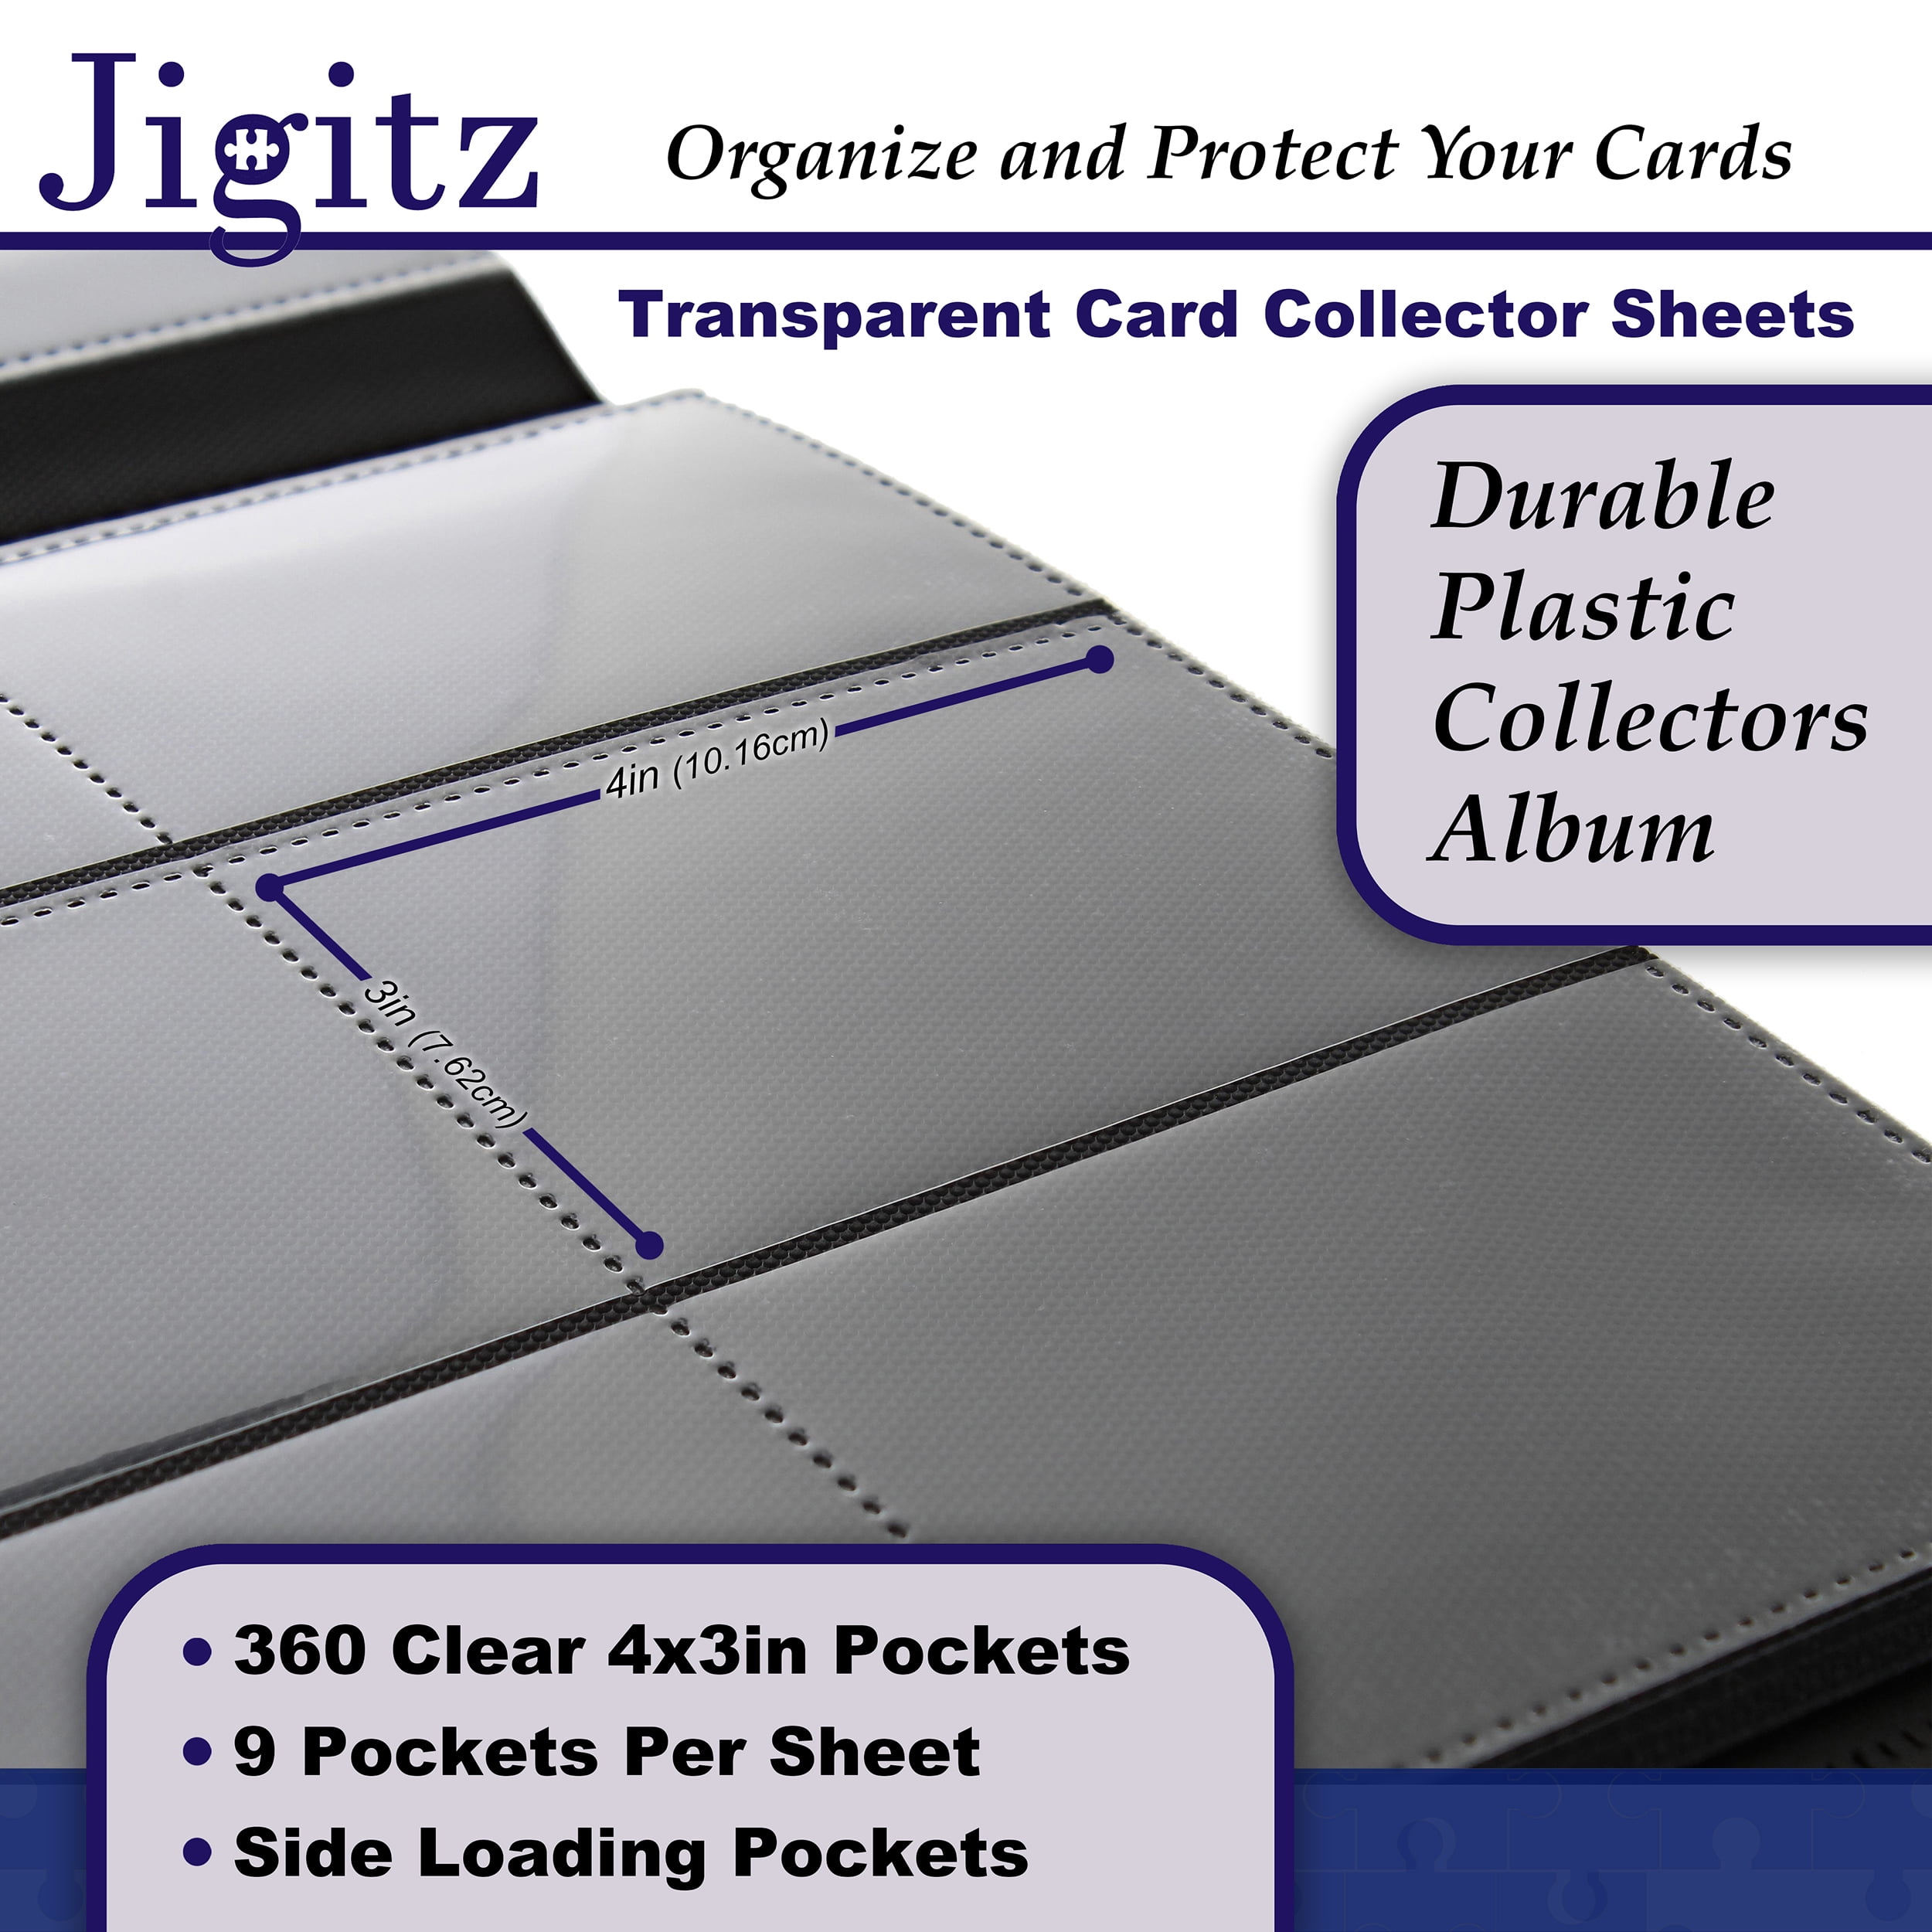 Jigitz Trading Card Binder with Sleeves - 20 Page Protective